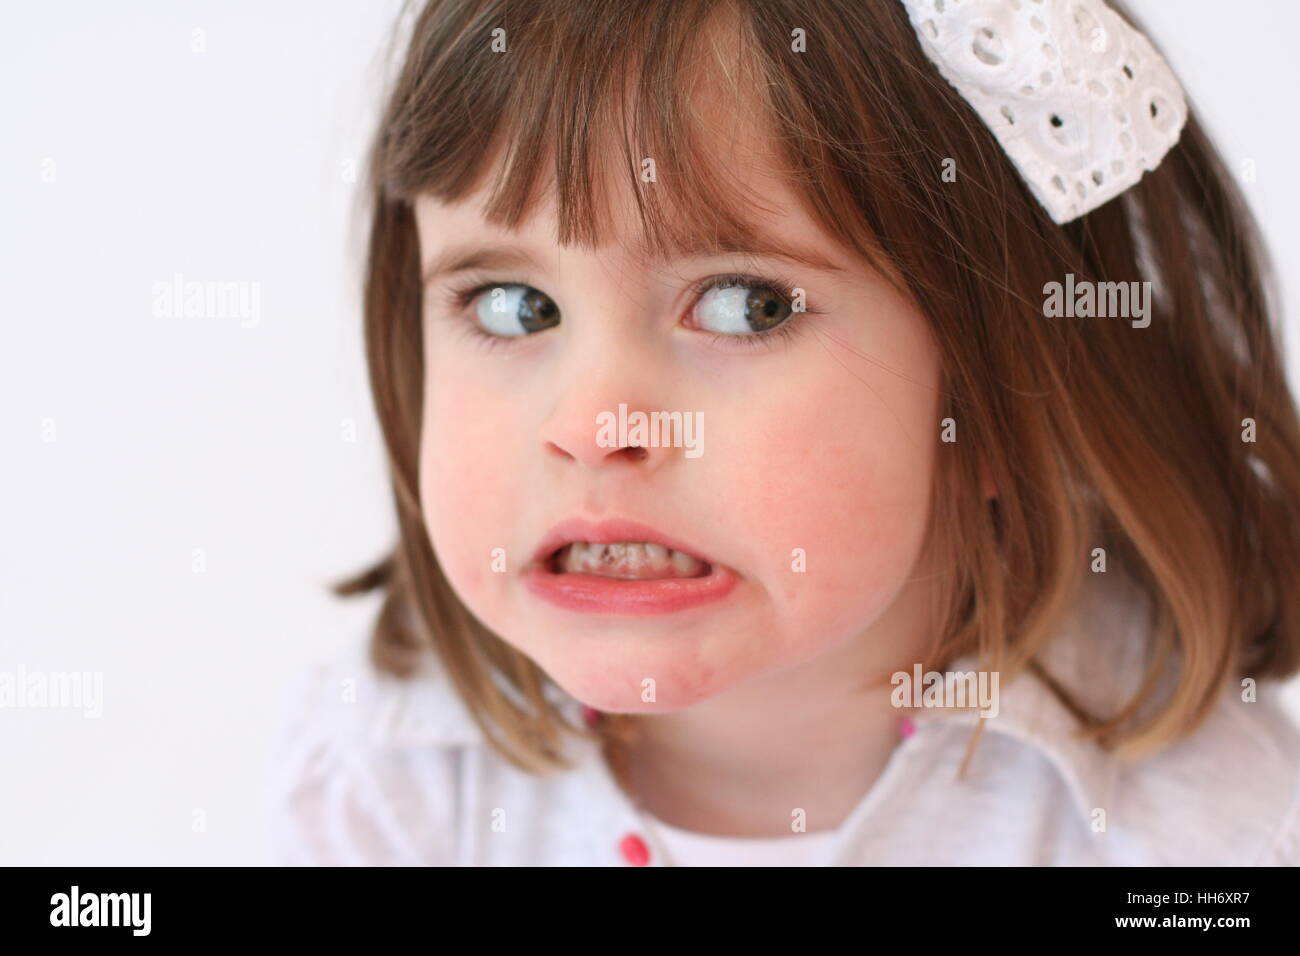 Little girl, child making a funny angry face, grinding her teeth Stock Photo